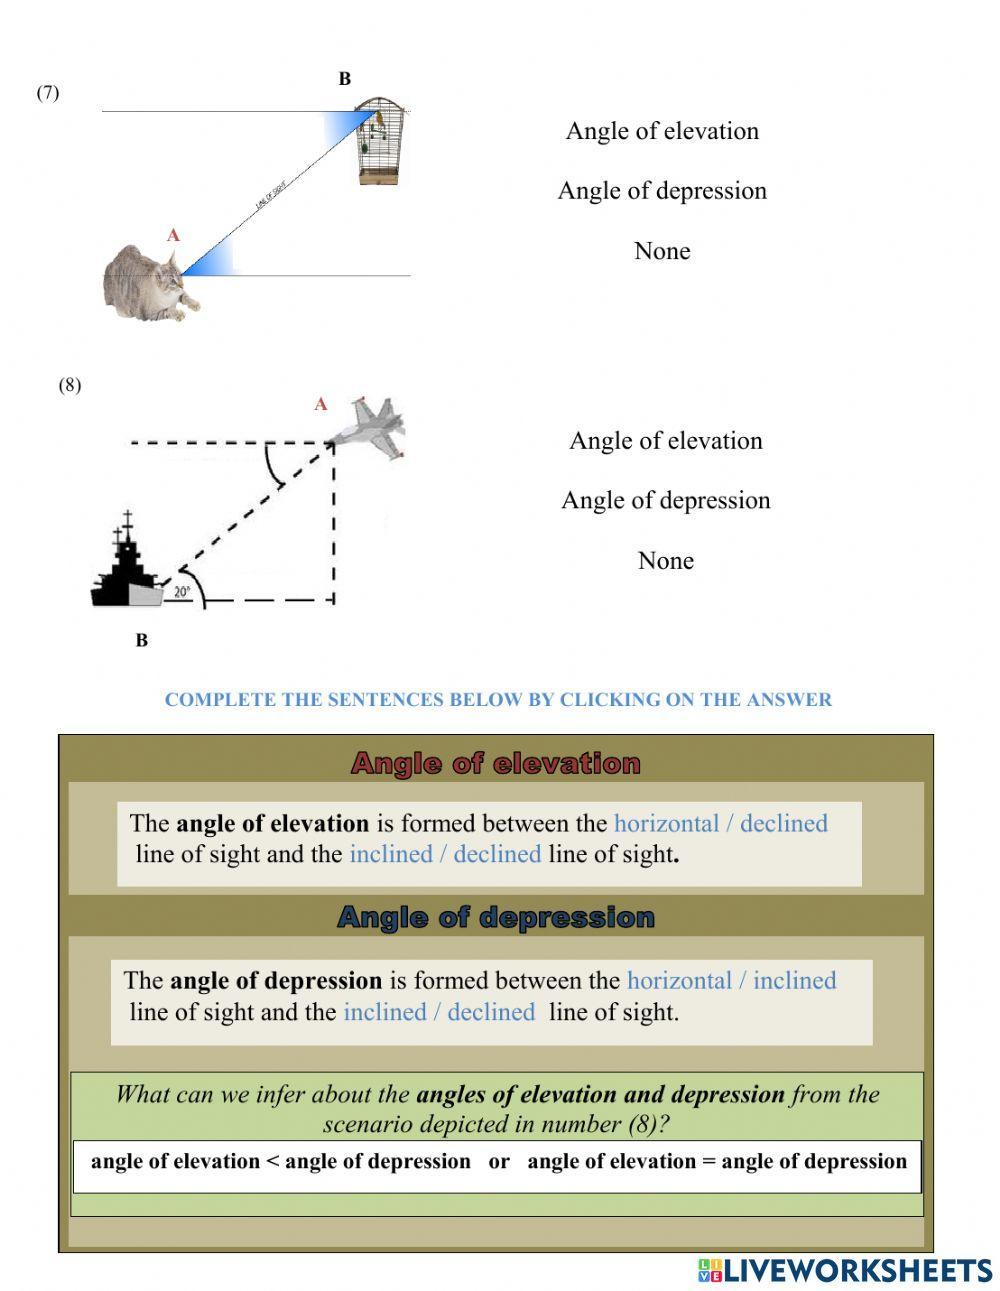 Angles of Elevation and Depression